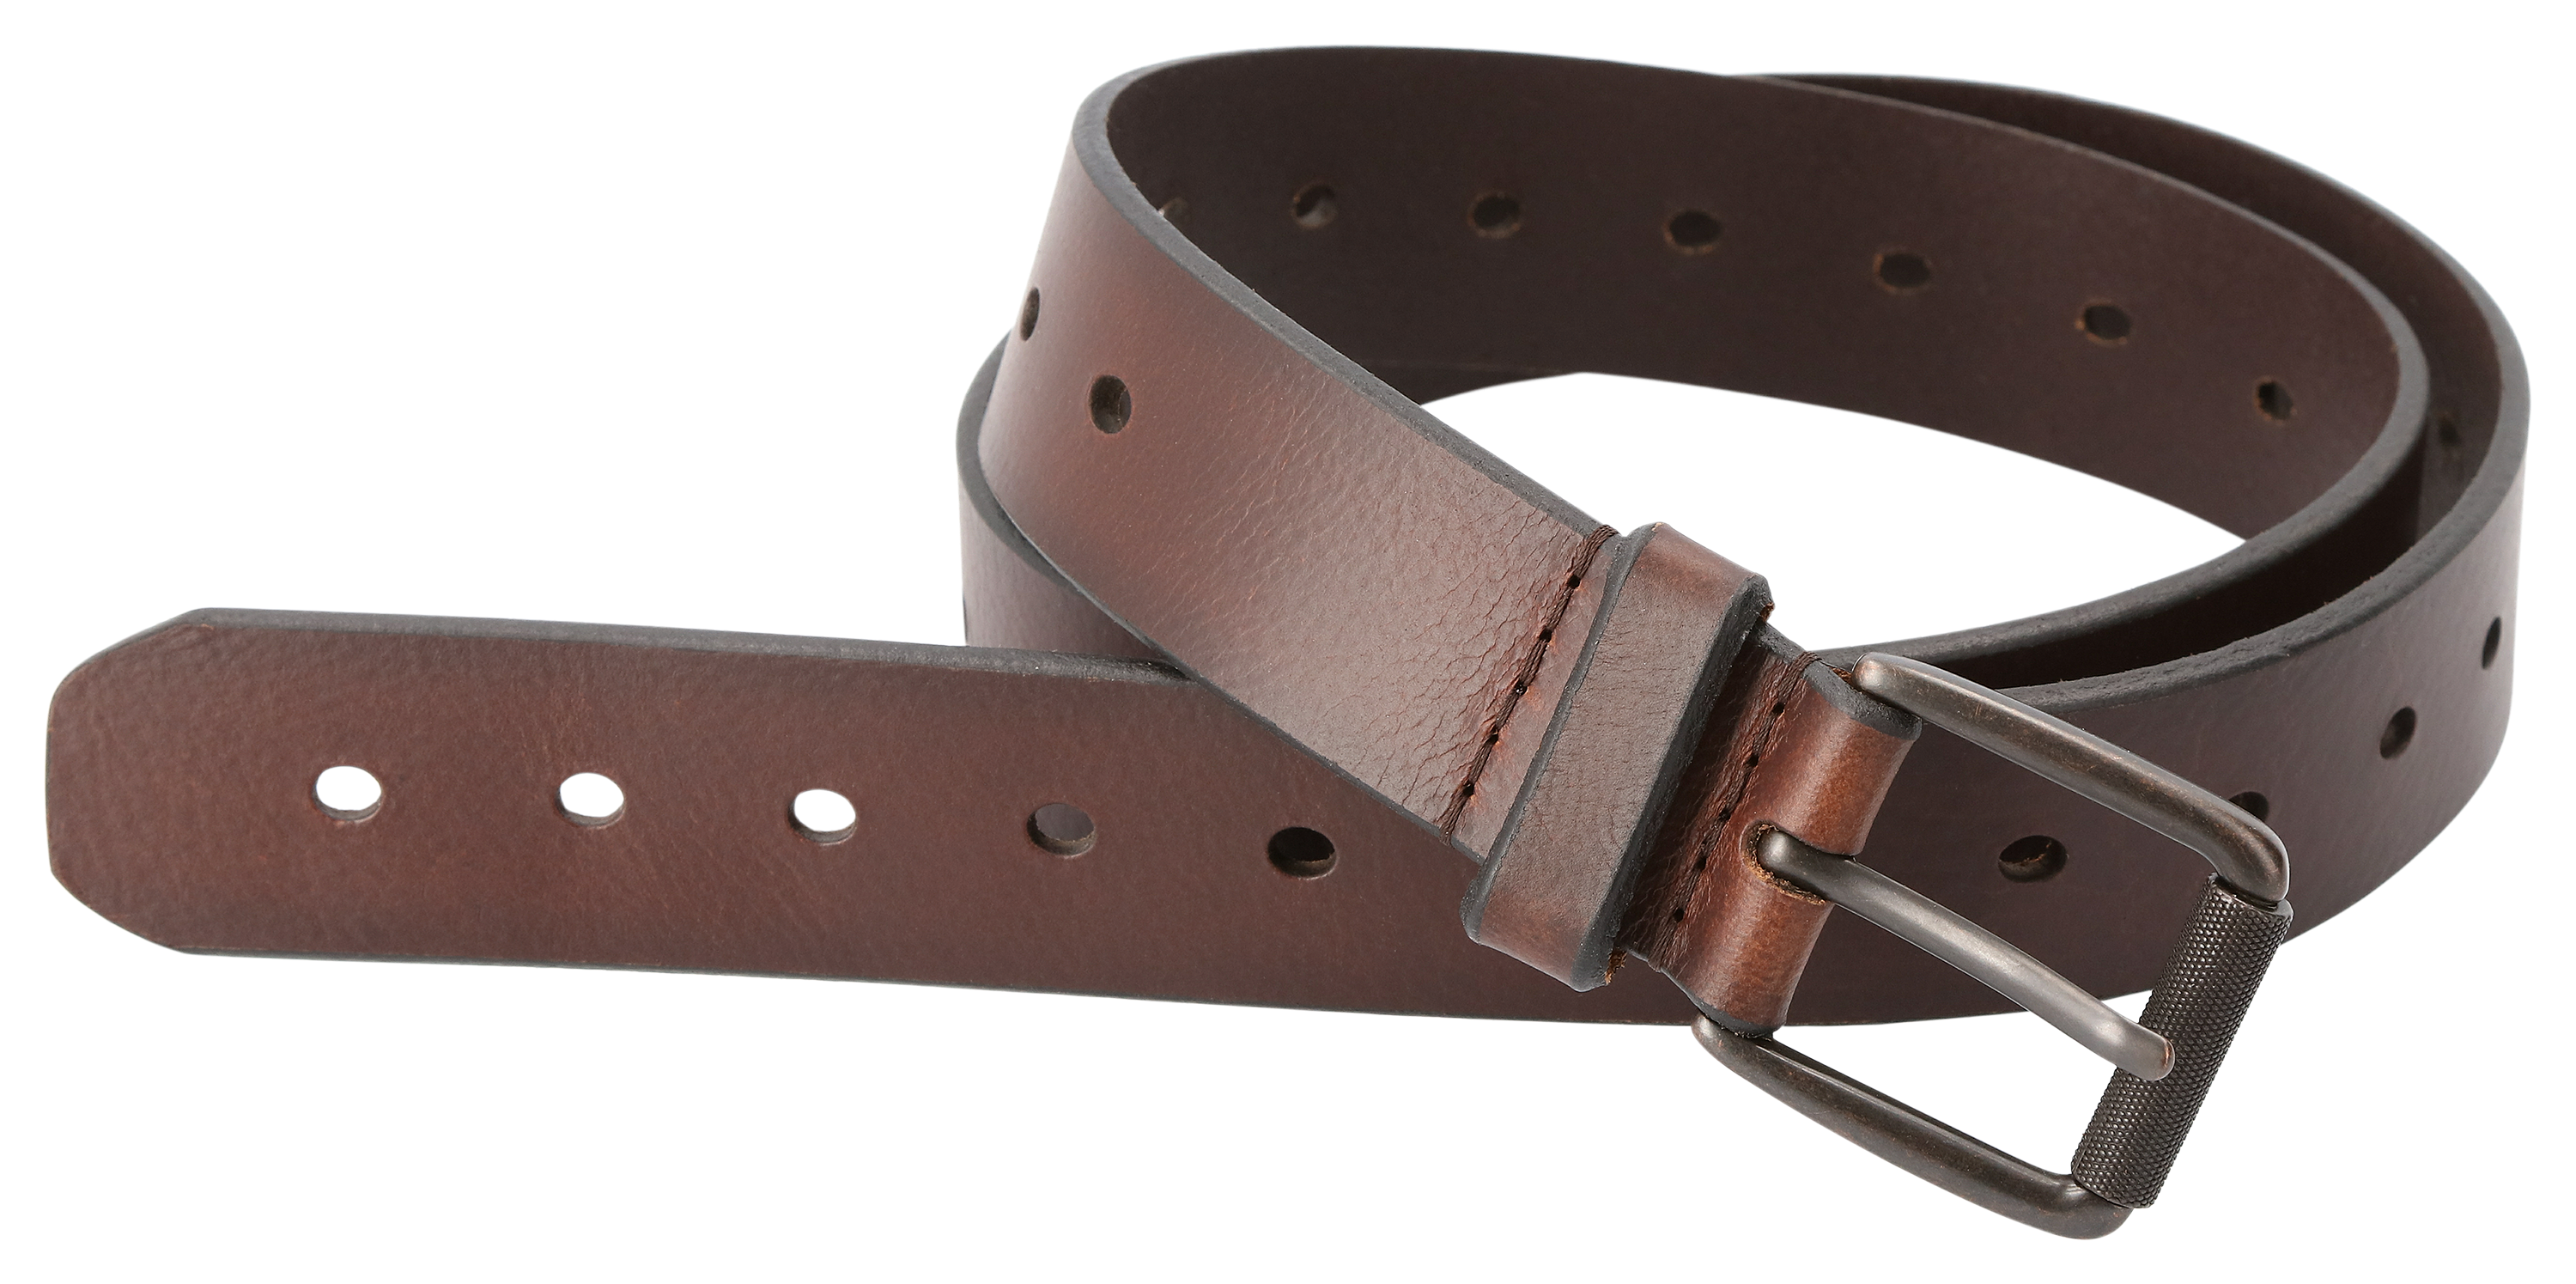 Typo belt buckle & Reversible leather strap 38 mm